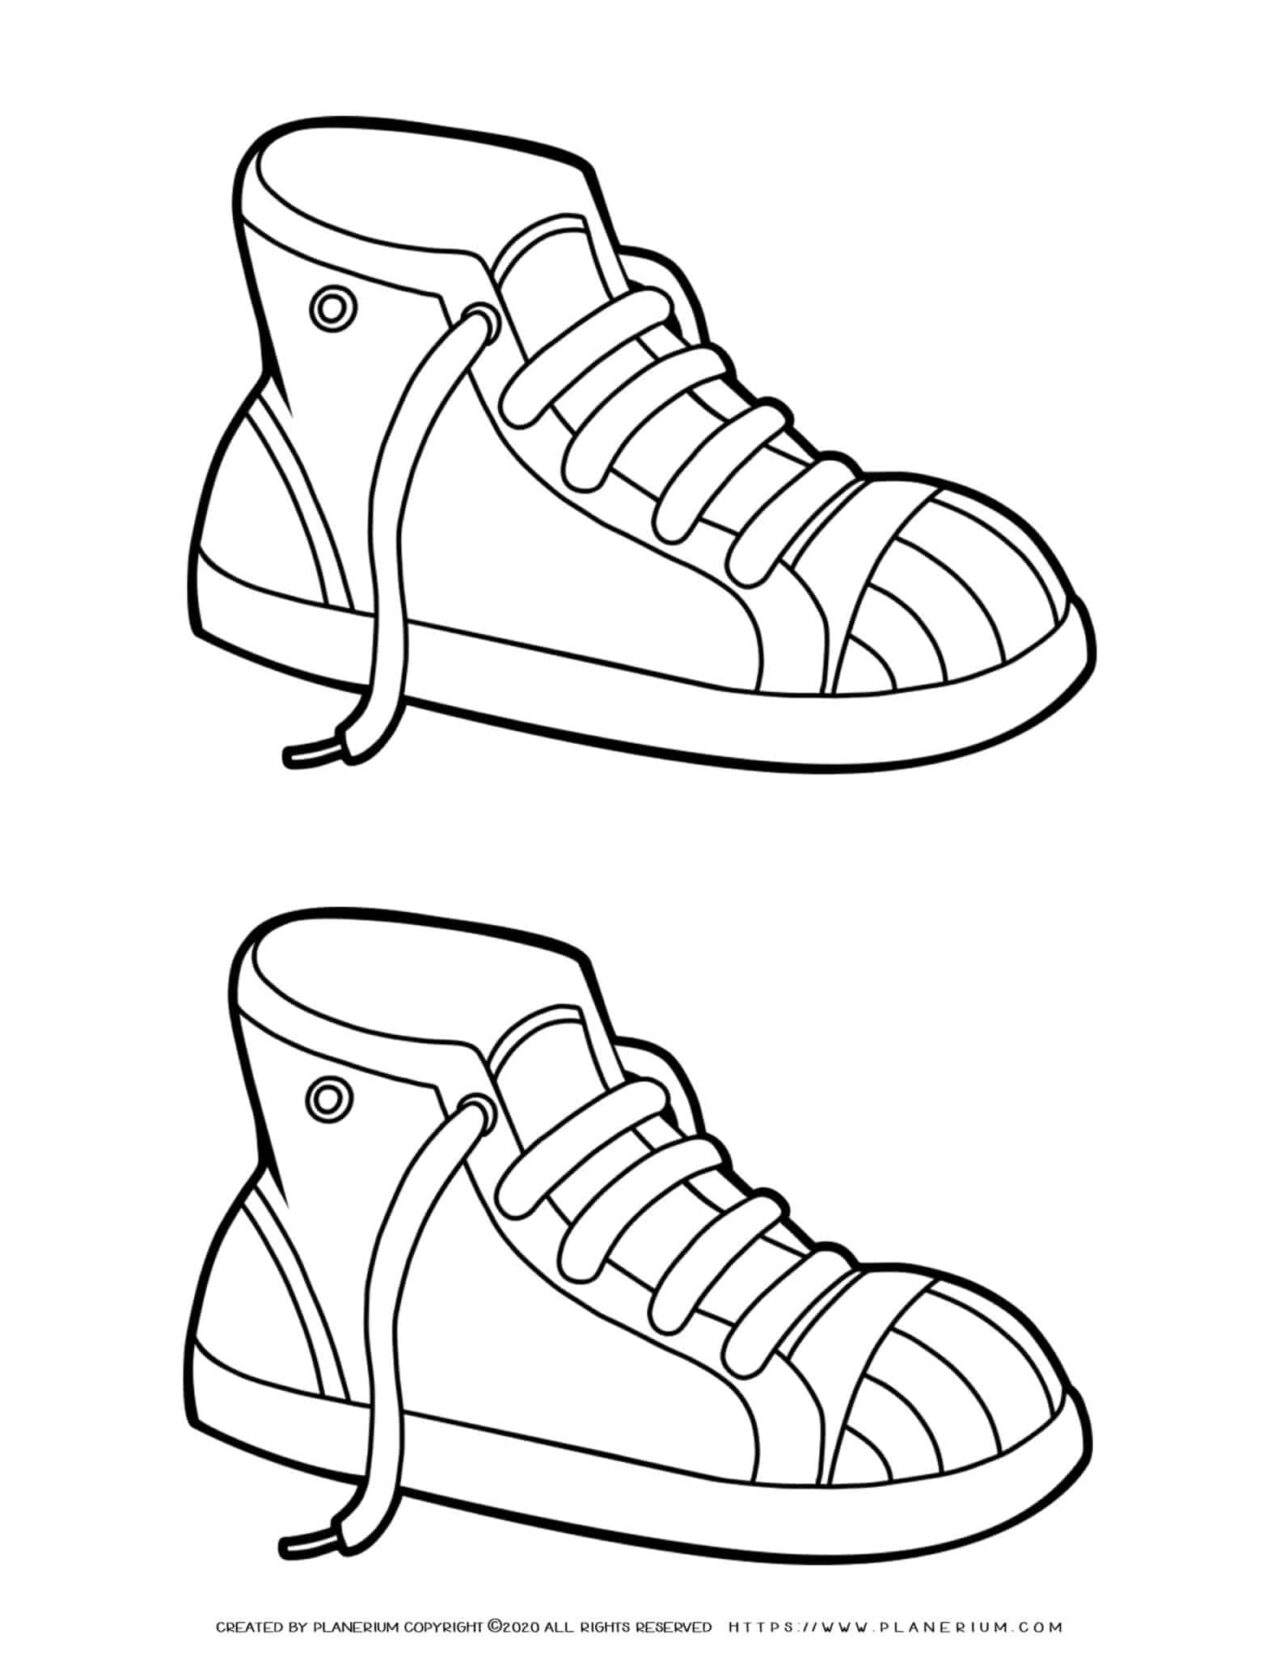 Clothes Coloring Page - Two Shoes Sneakers | Planerium